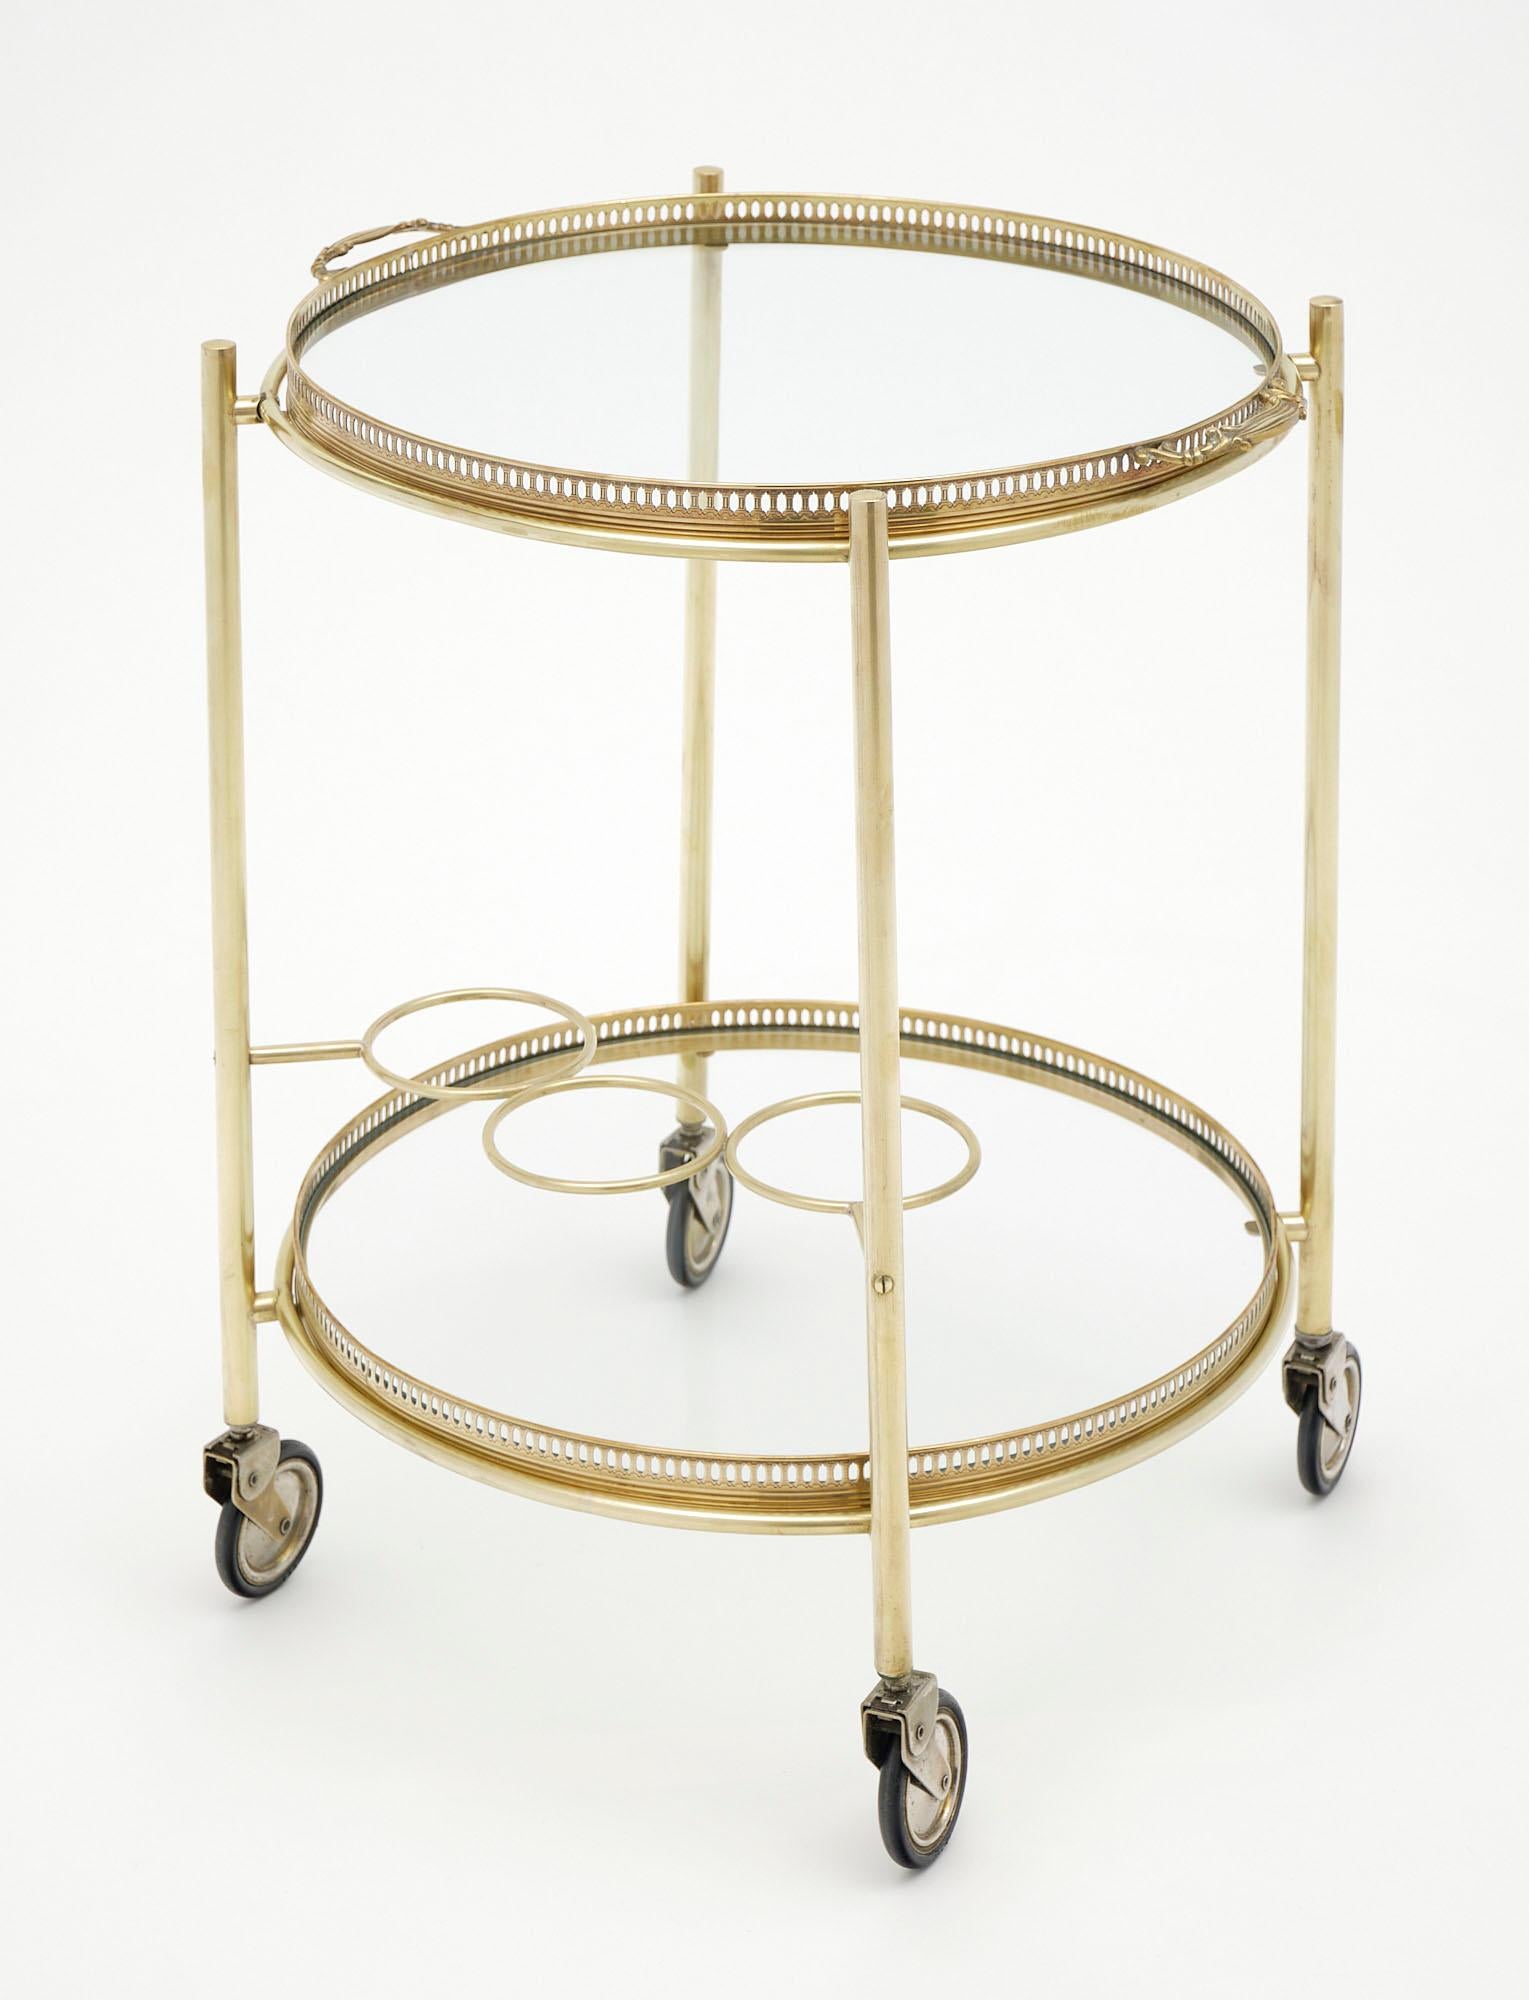 Bar cart in gilt brass, French, featuring a detachable tray up top and a bottle holder off the bottom. We love the scale of this piece - perfect for serving drinks!